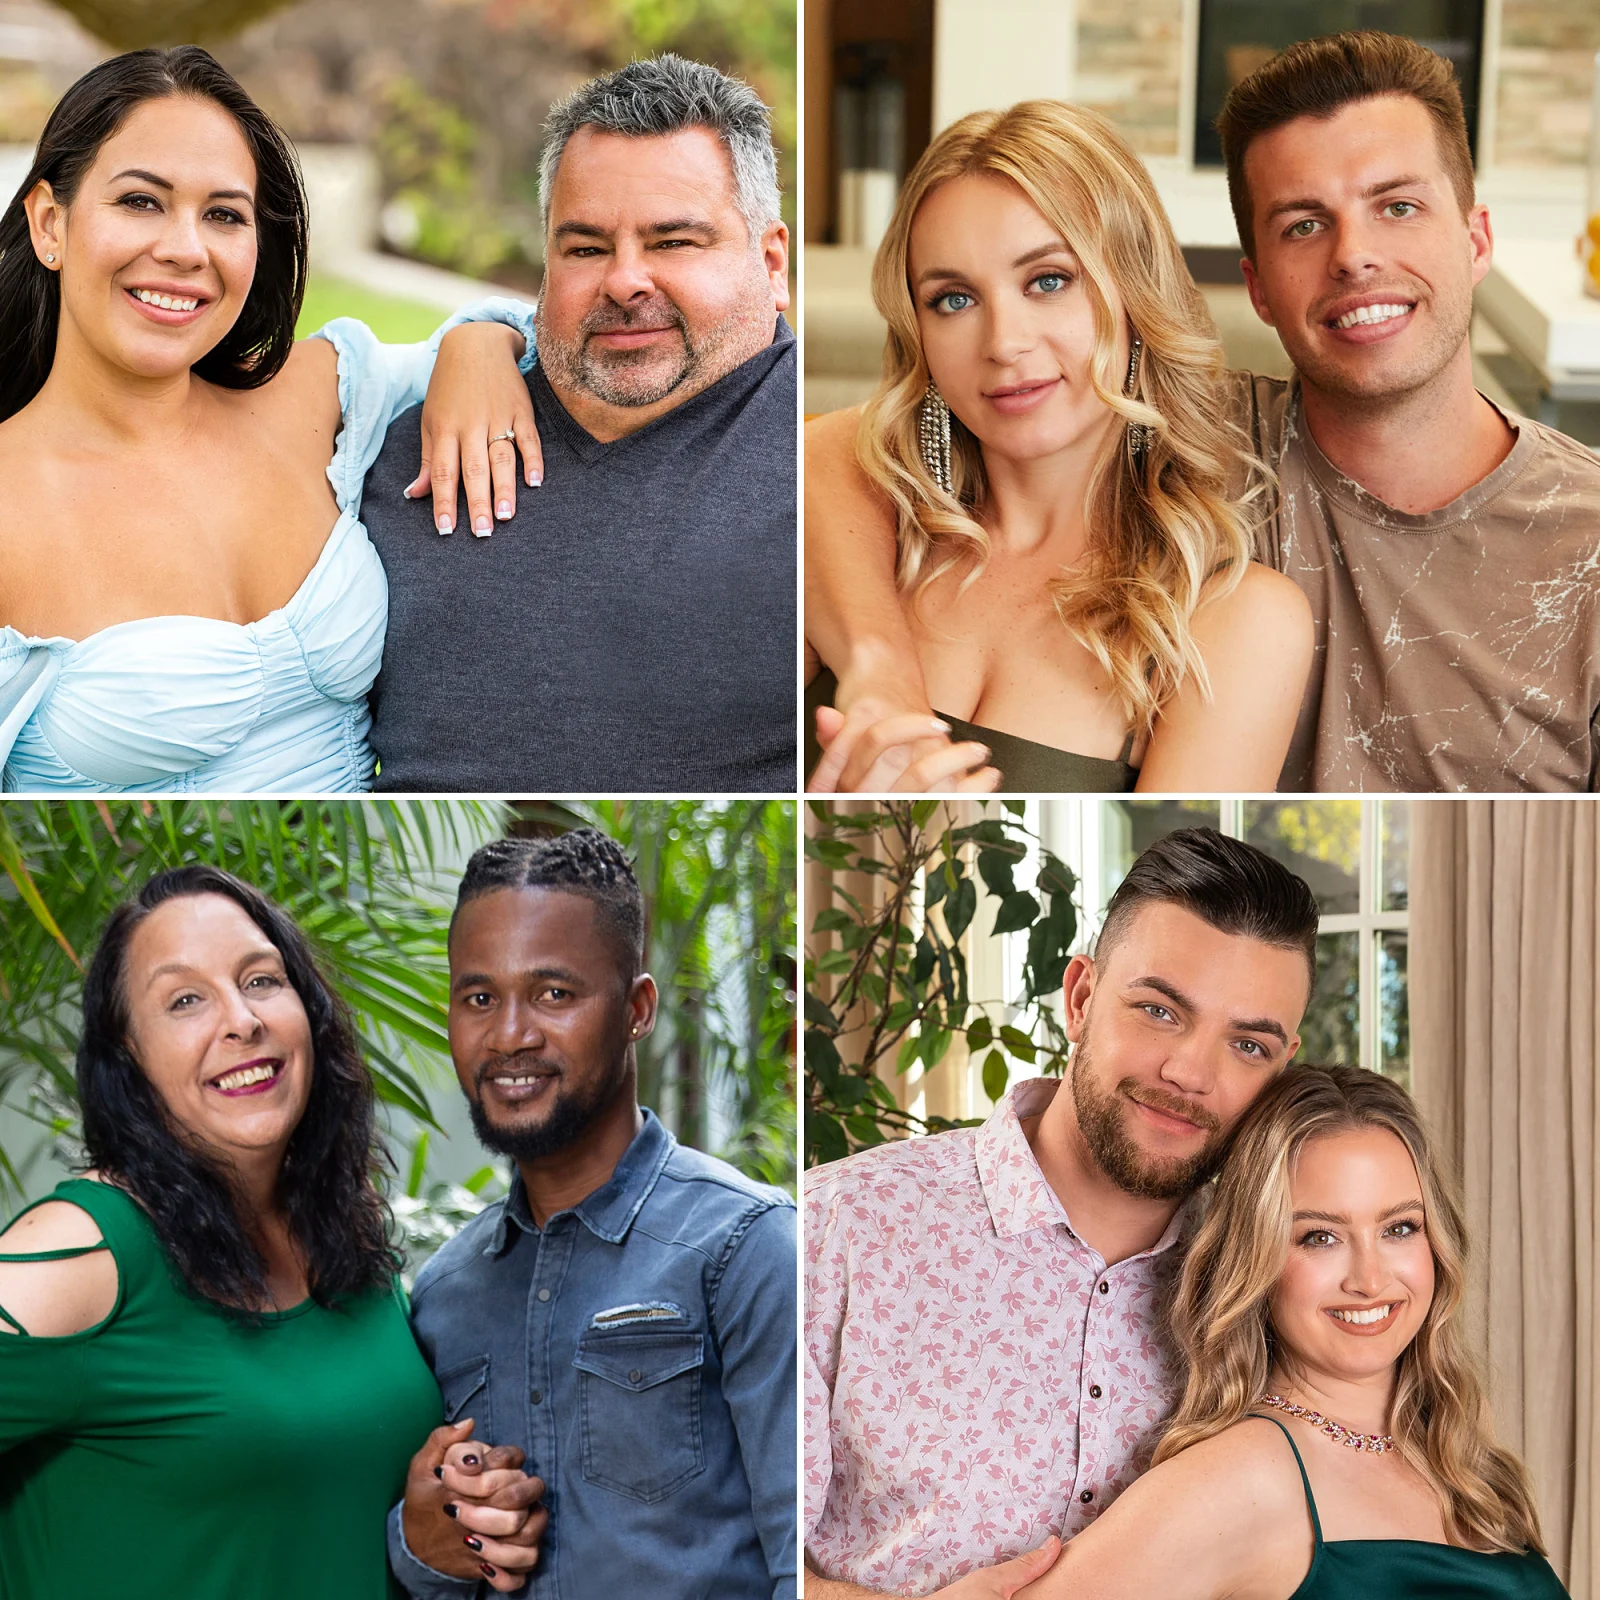 90 Day Fiancé: Happily, Ever After? Season 7 Episode 9